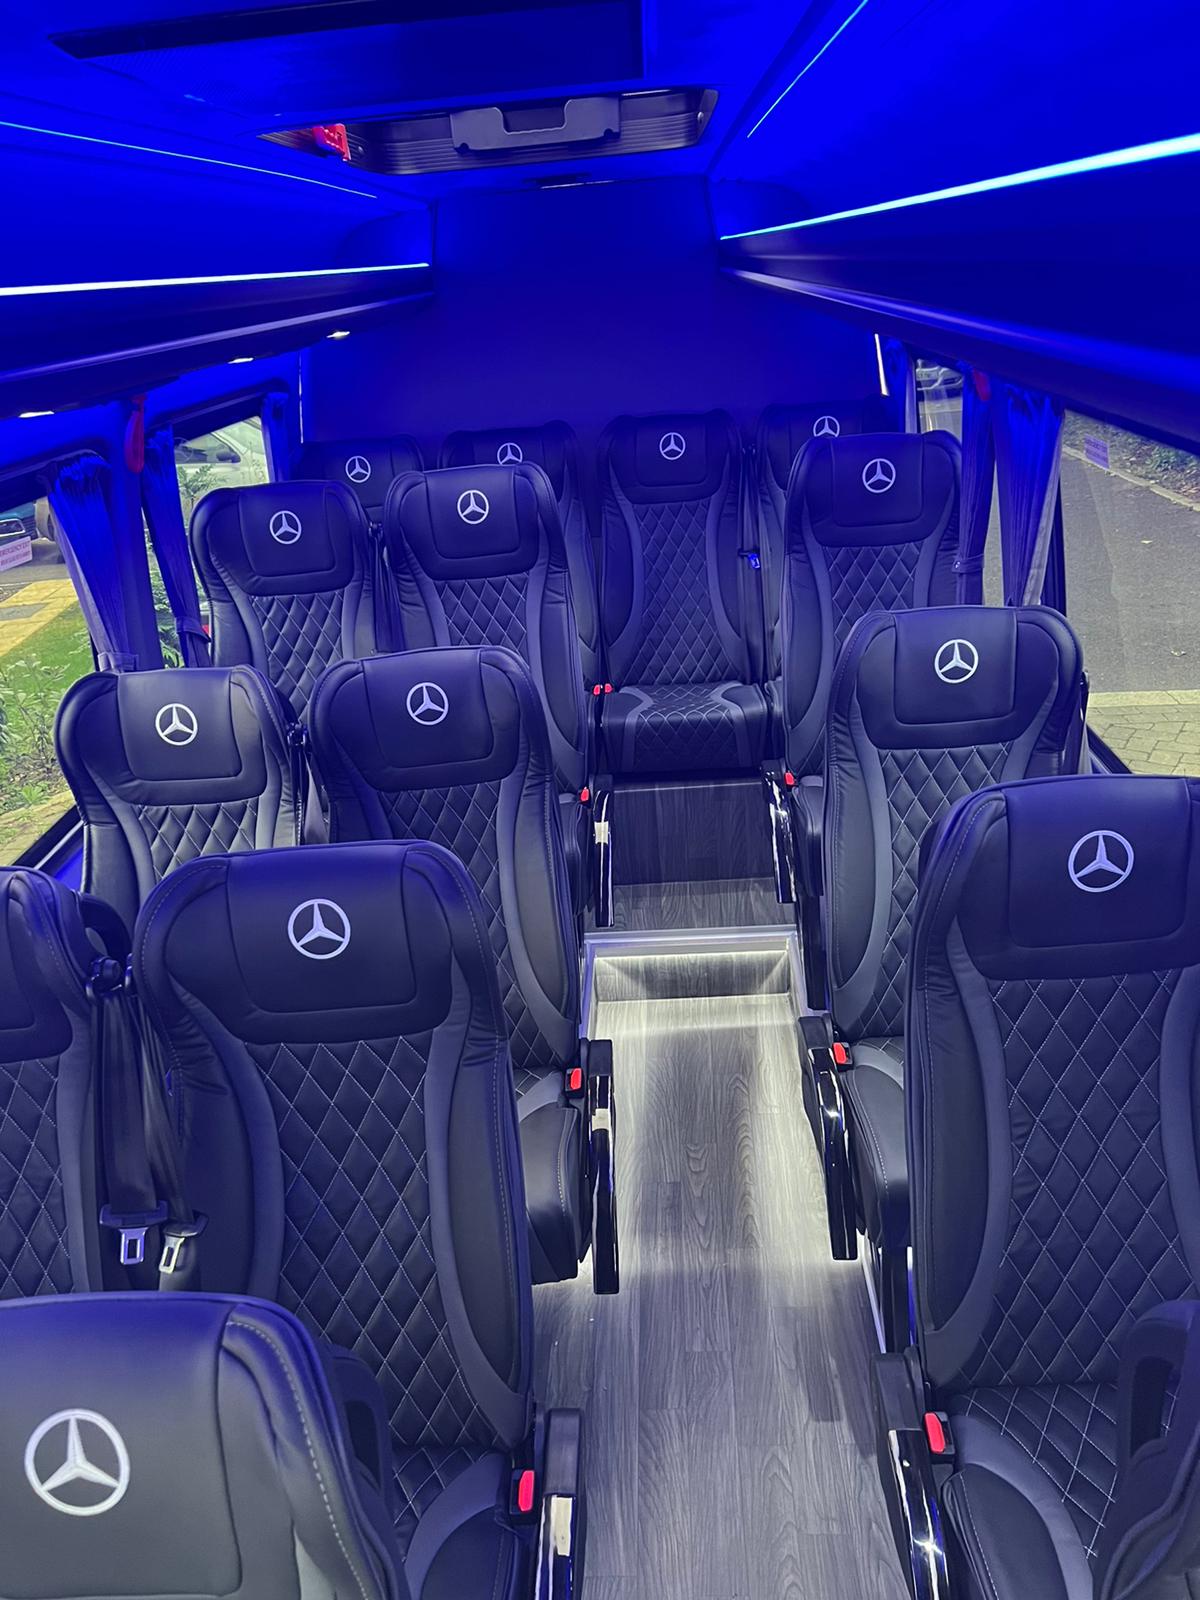 Top Tips for Choosing the Right Coach Hire for Your UK School Trip